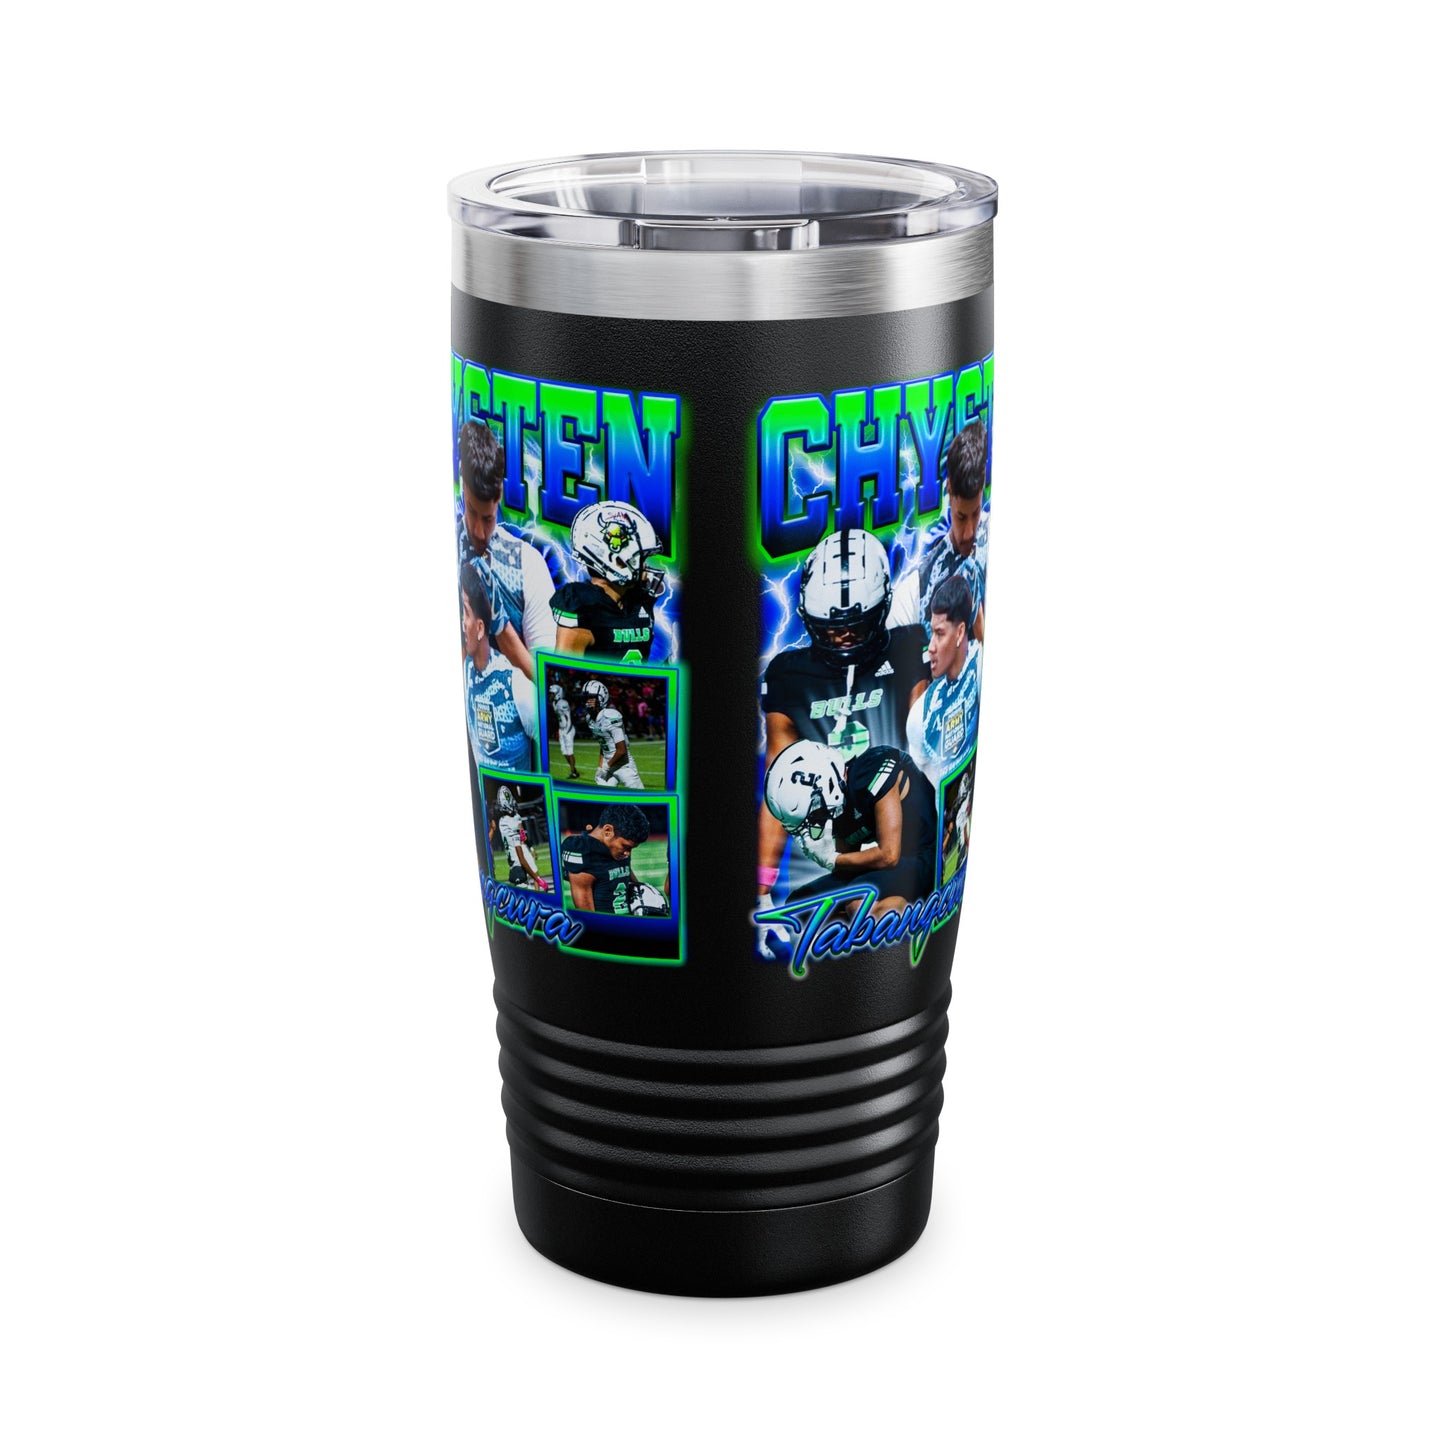 Chysten Tabangcura Stainless Steal Tumbler